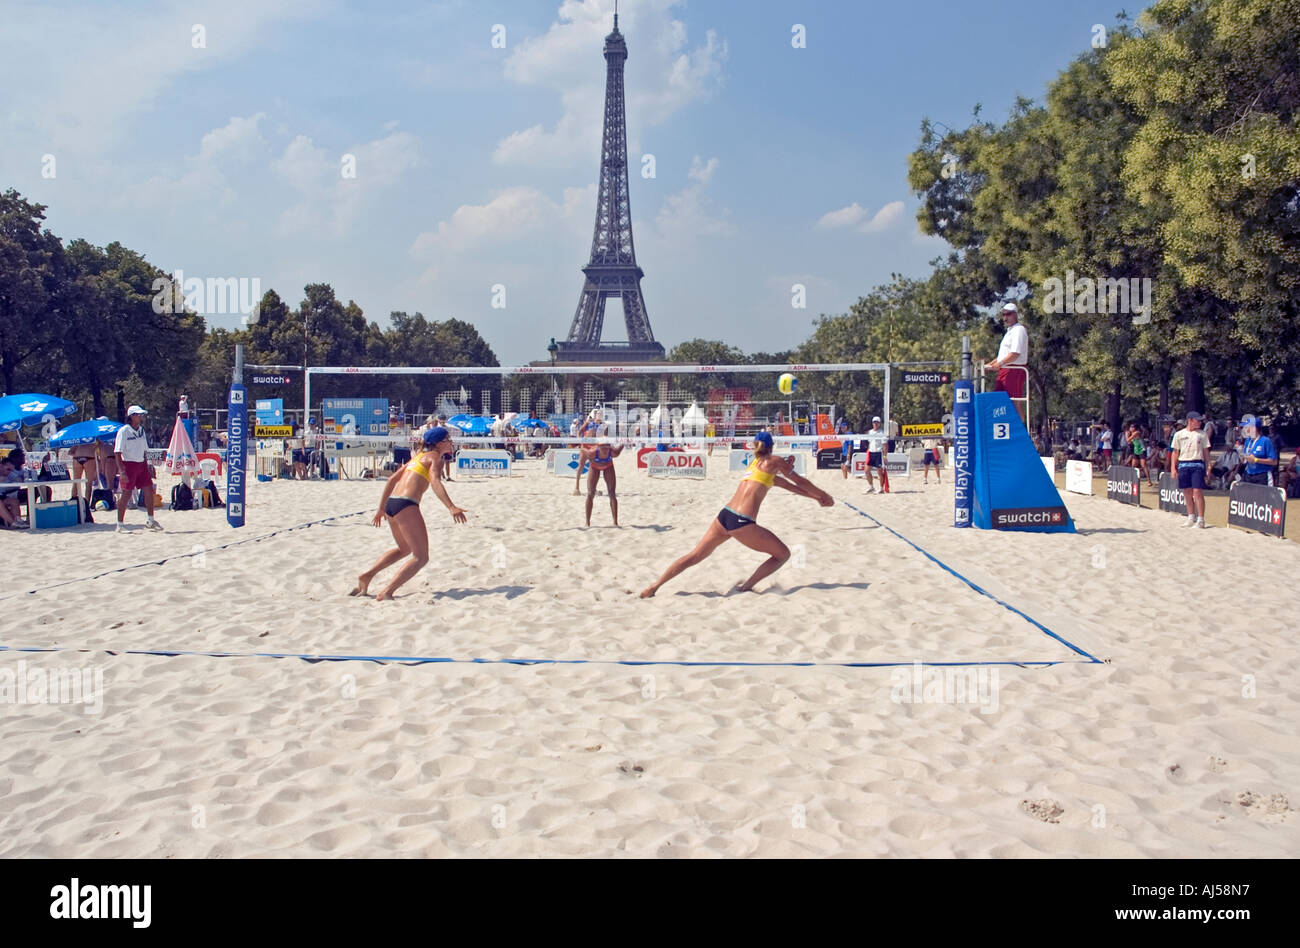 People playing beach volley ball on an artificial field near the Eiffel tower, during the Paris Plage event, Paris, France Stock Photo